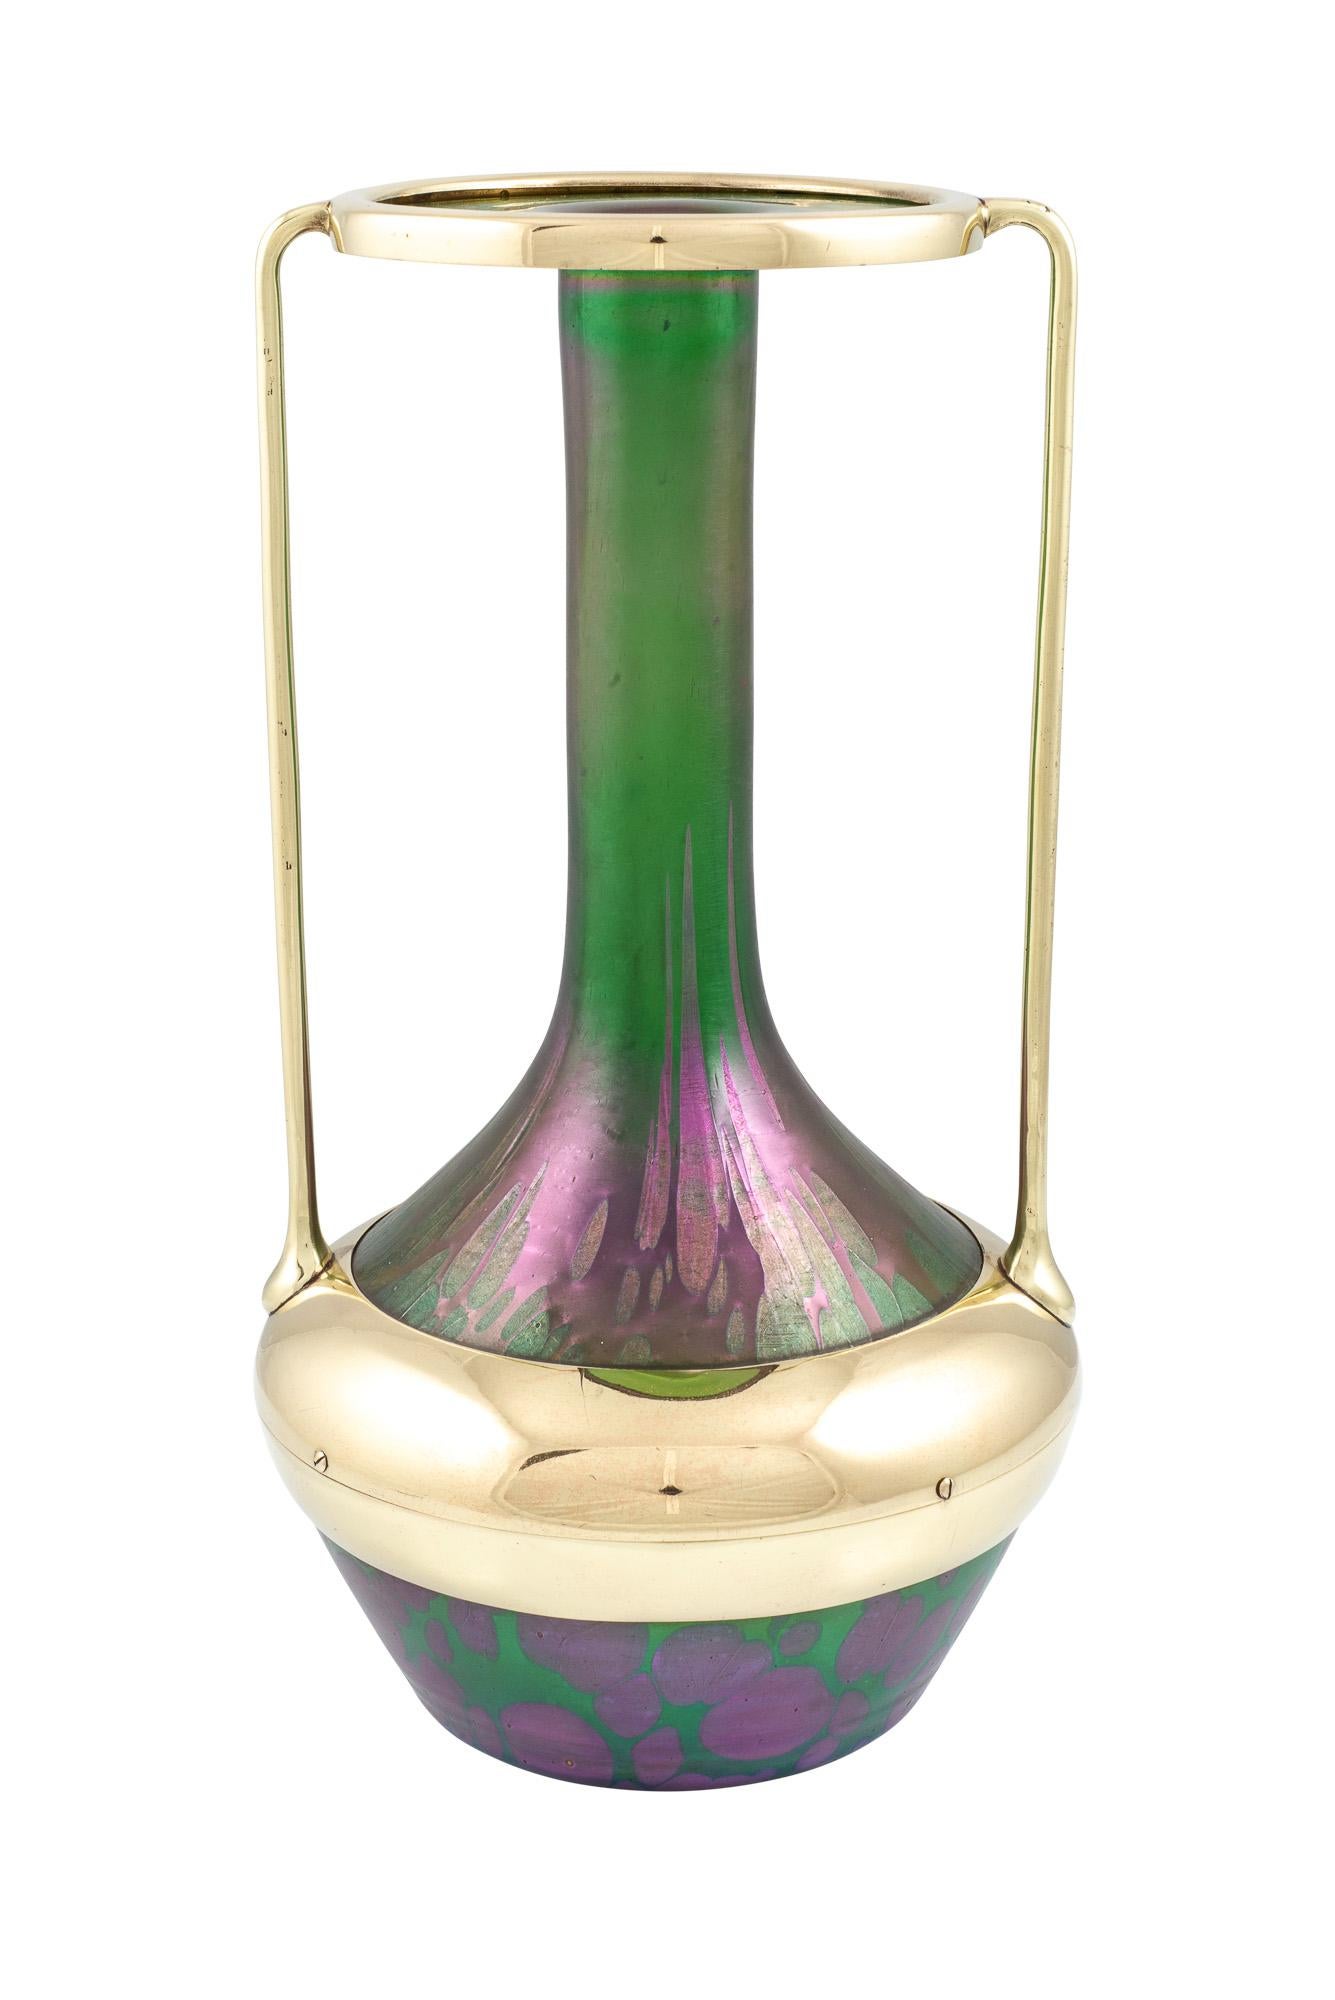 Glass vase with brass mounting designed by Alfred Roller manufactured by Johann Loetz Witwe PG 1/743 decoration ca. 1901 Austrian Jugendstil mould-blown reduced and iridescent Colorful Green Purple Art Nouveau

In close cooperation with many